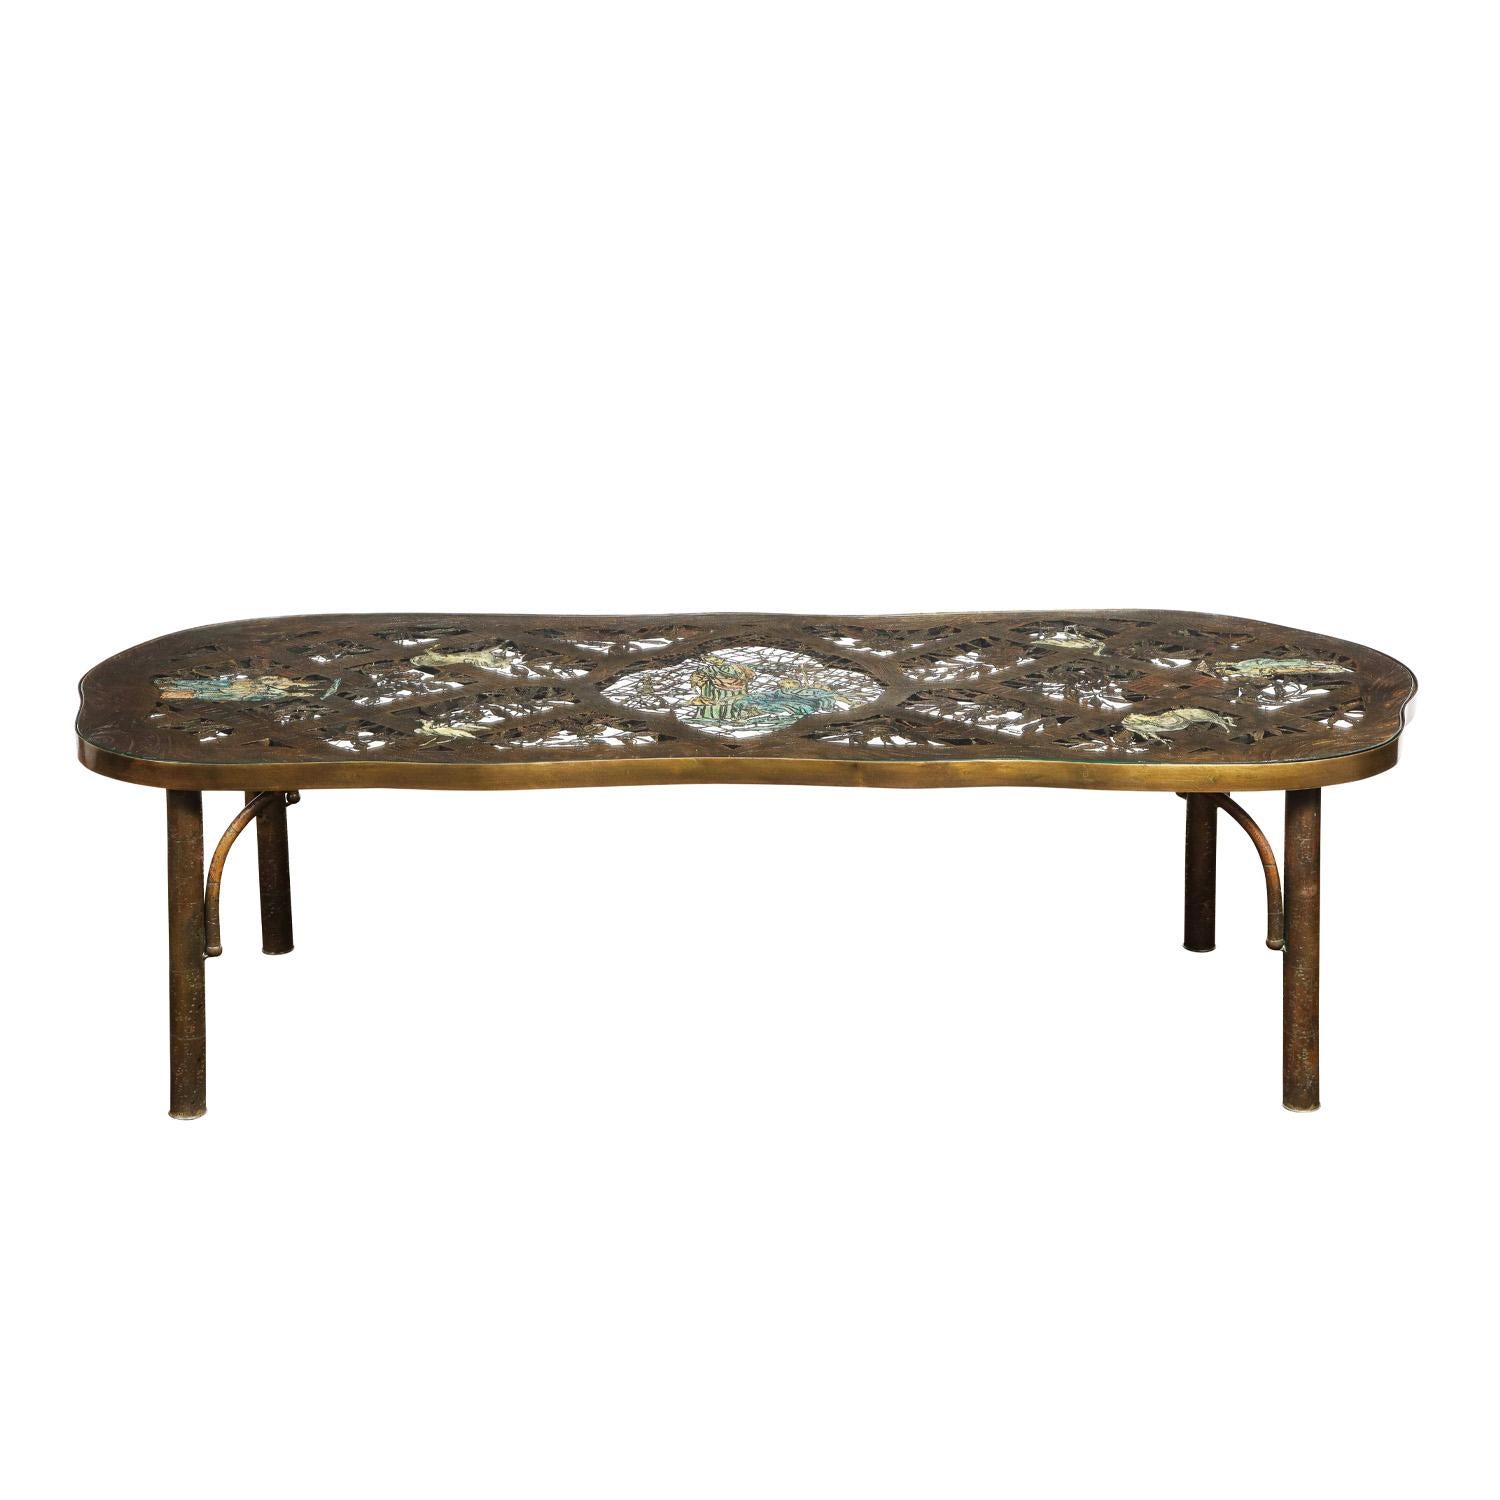 Exceptional and rare “Fragonard Pierced Coffee Table” in pewter and bronze, intricately carved with hand-painted polychrome enamels and gold and copper leaf with an inset glass top, by Philip and Kelvin Laverne, American 1960’s (signed “Philip